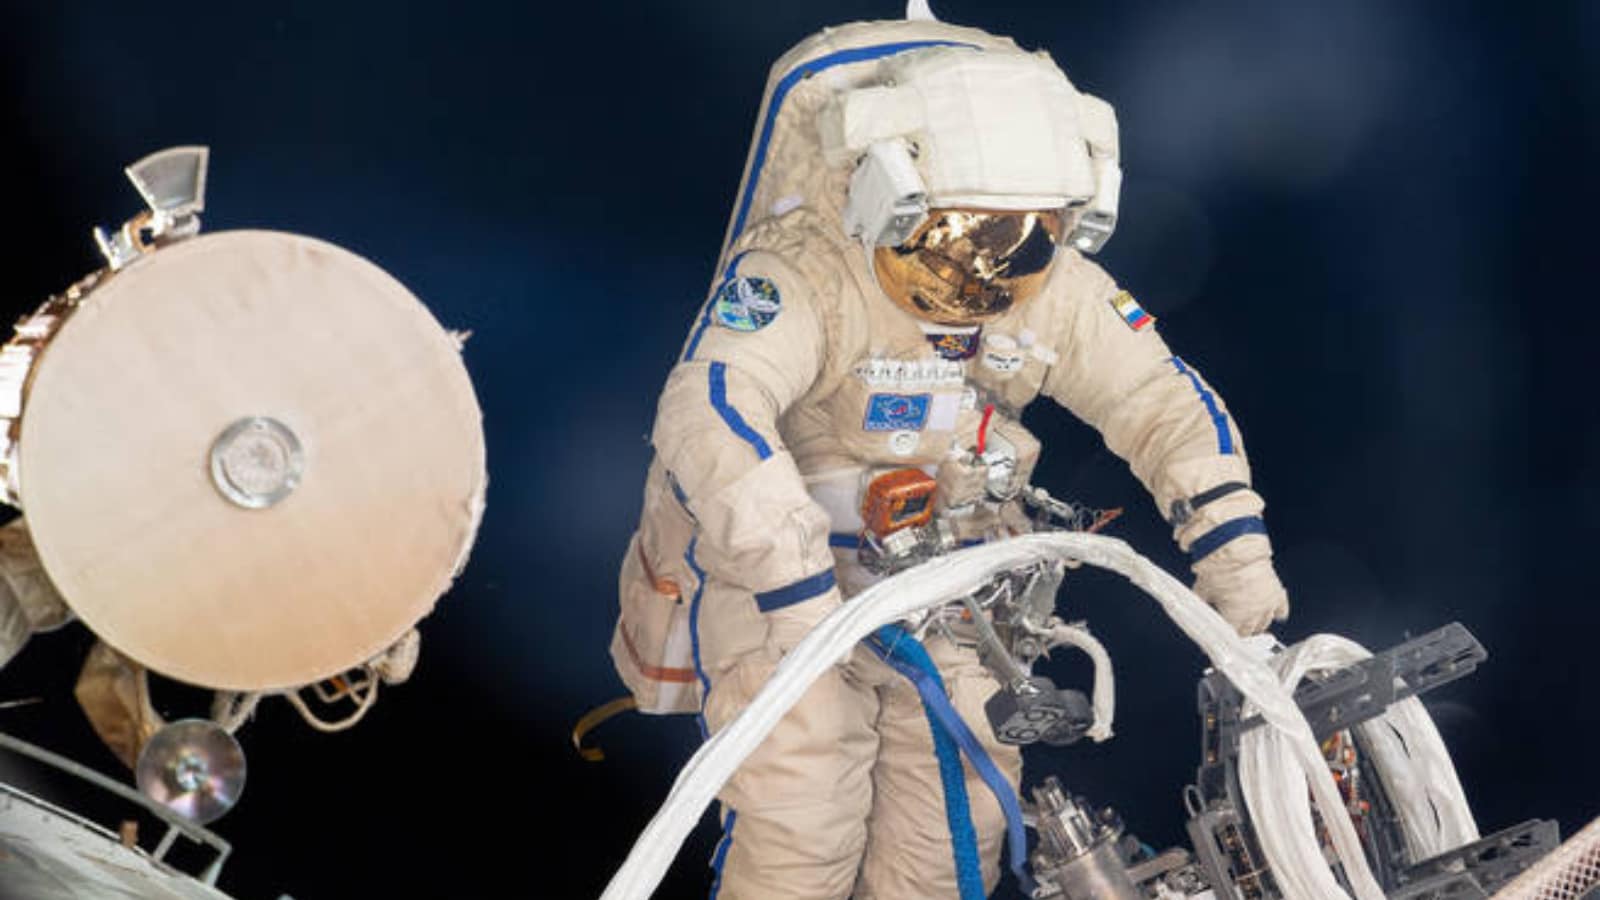 First Spacewalk of 2022 to Happen Today, Here's a Look at Previous Expeditions